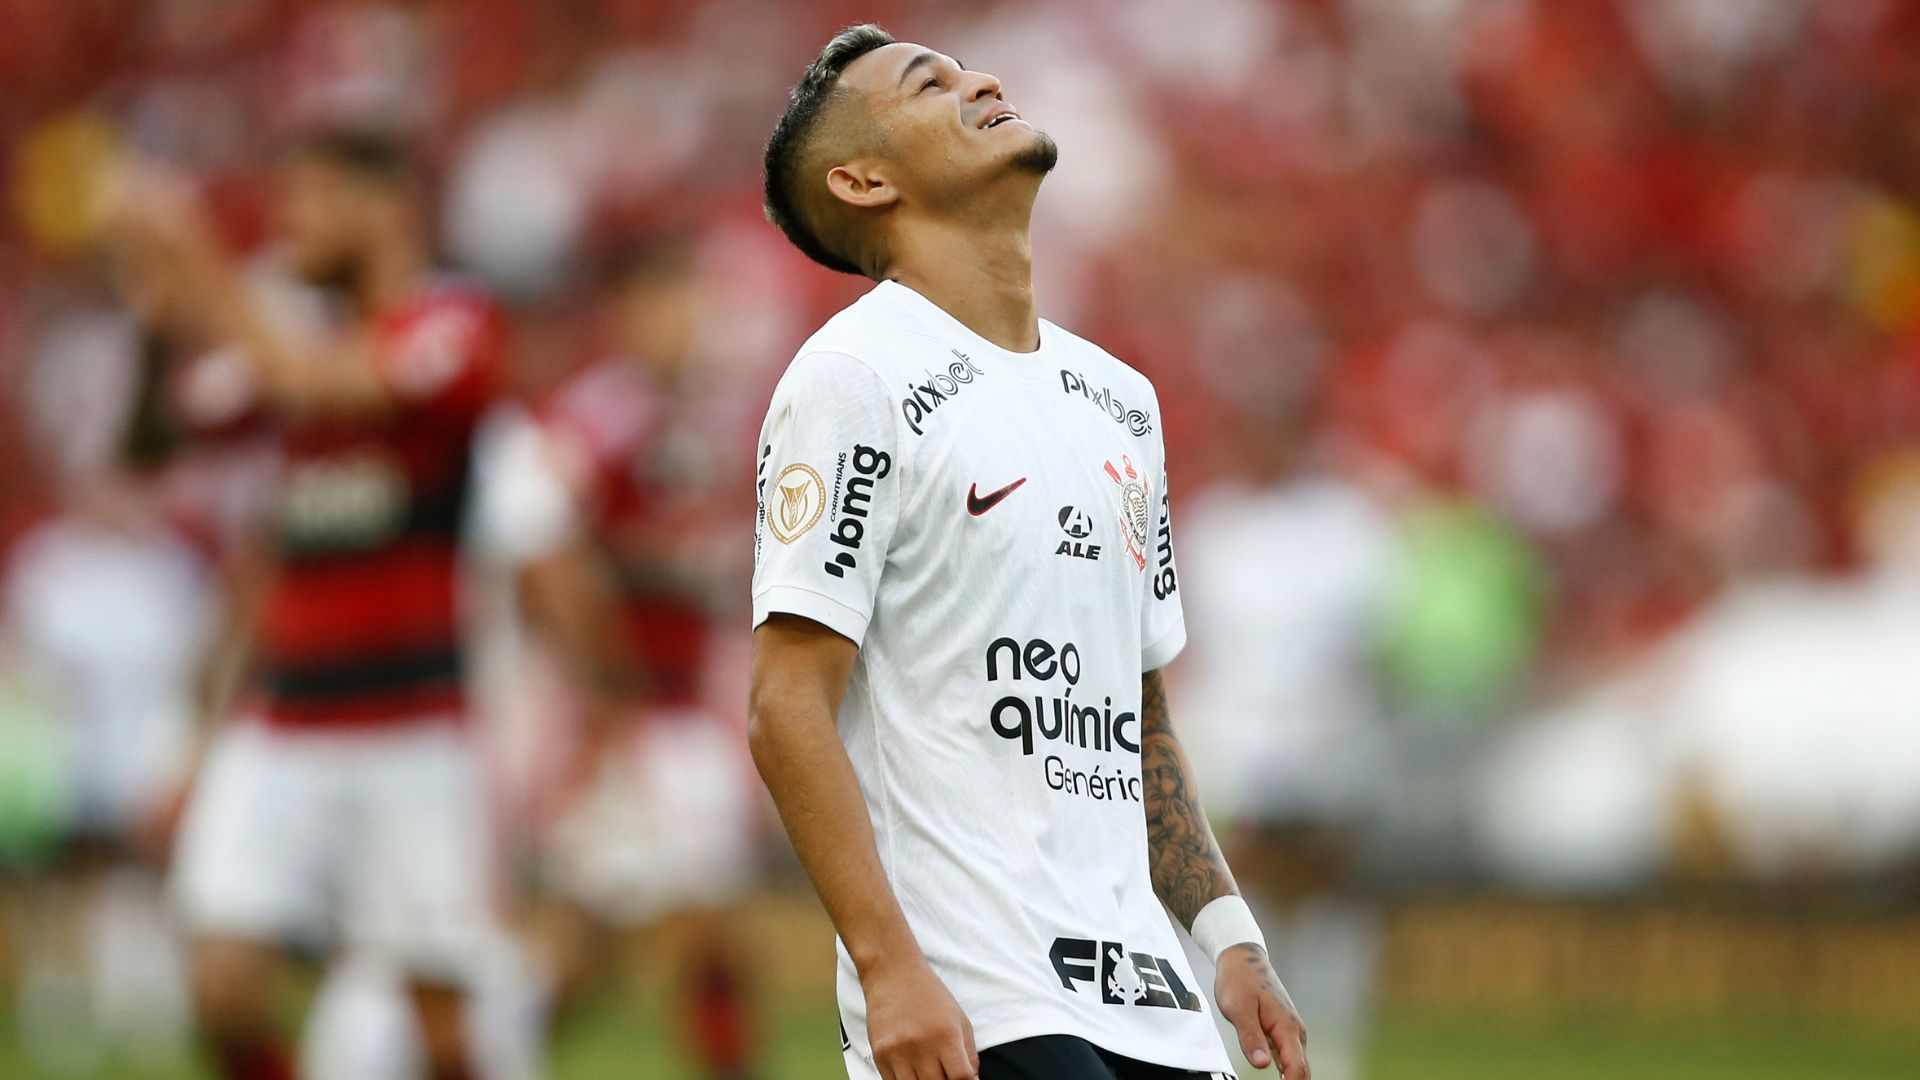 Corinthians reaches seven games without a win, six under Vanderlei Luxemburgo (Credit: Getty Images)